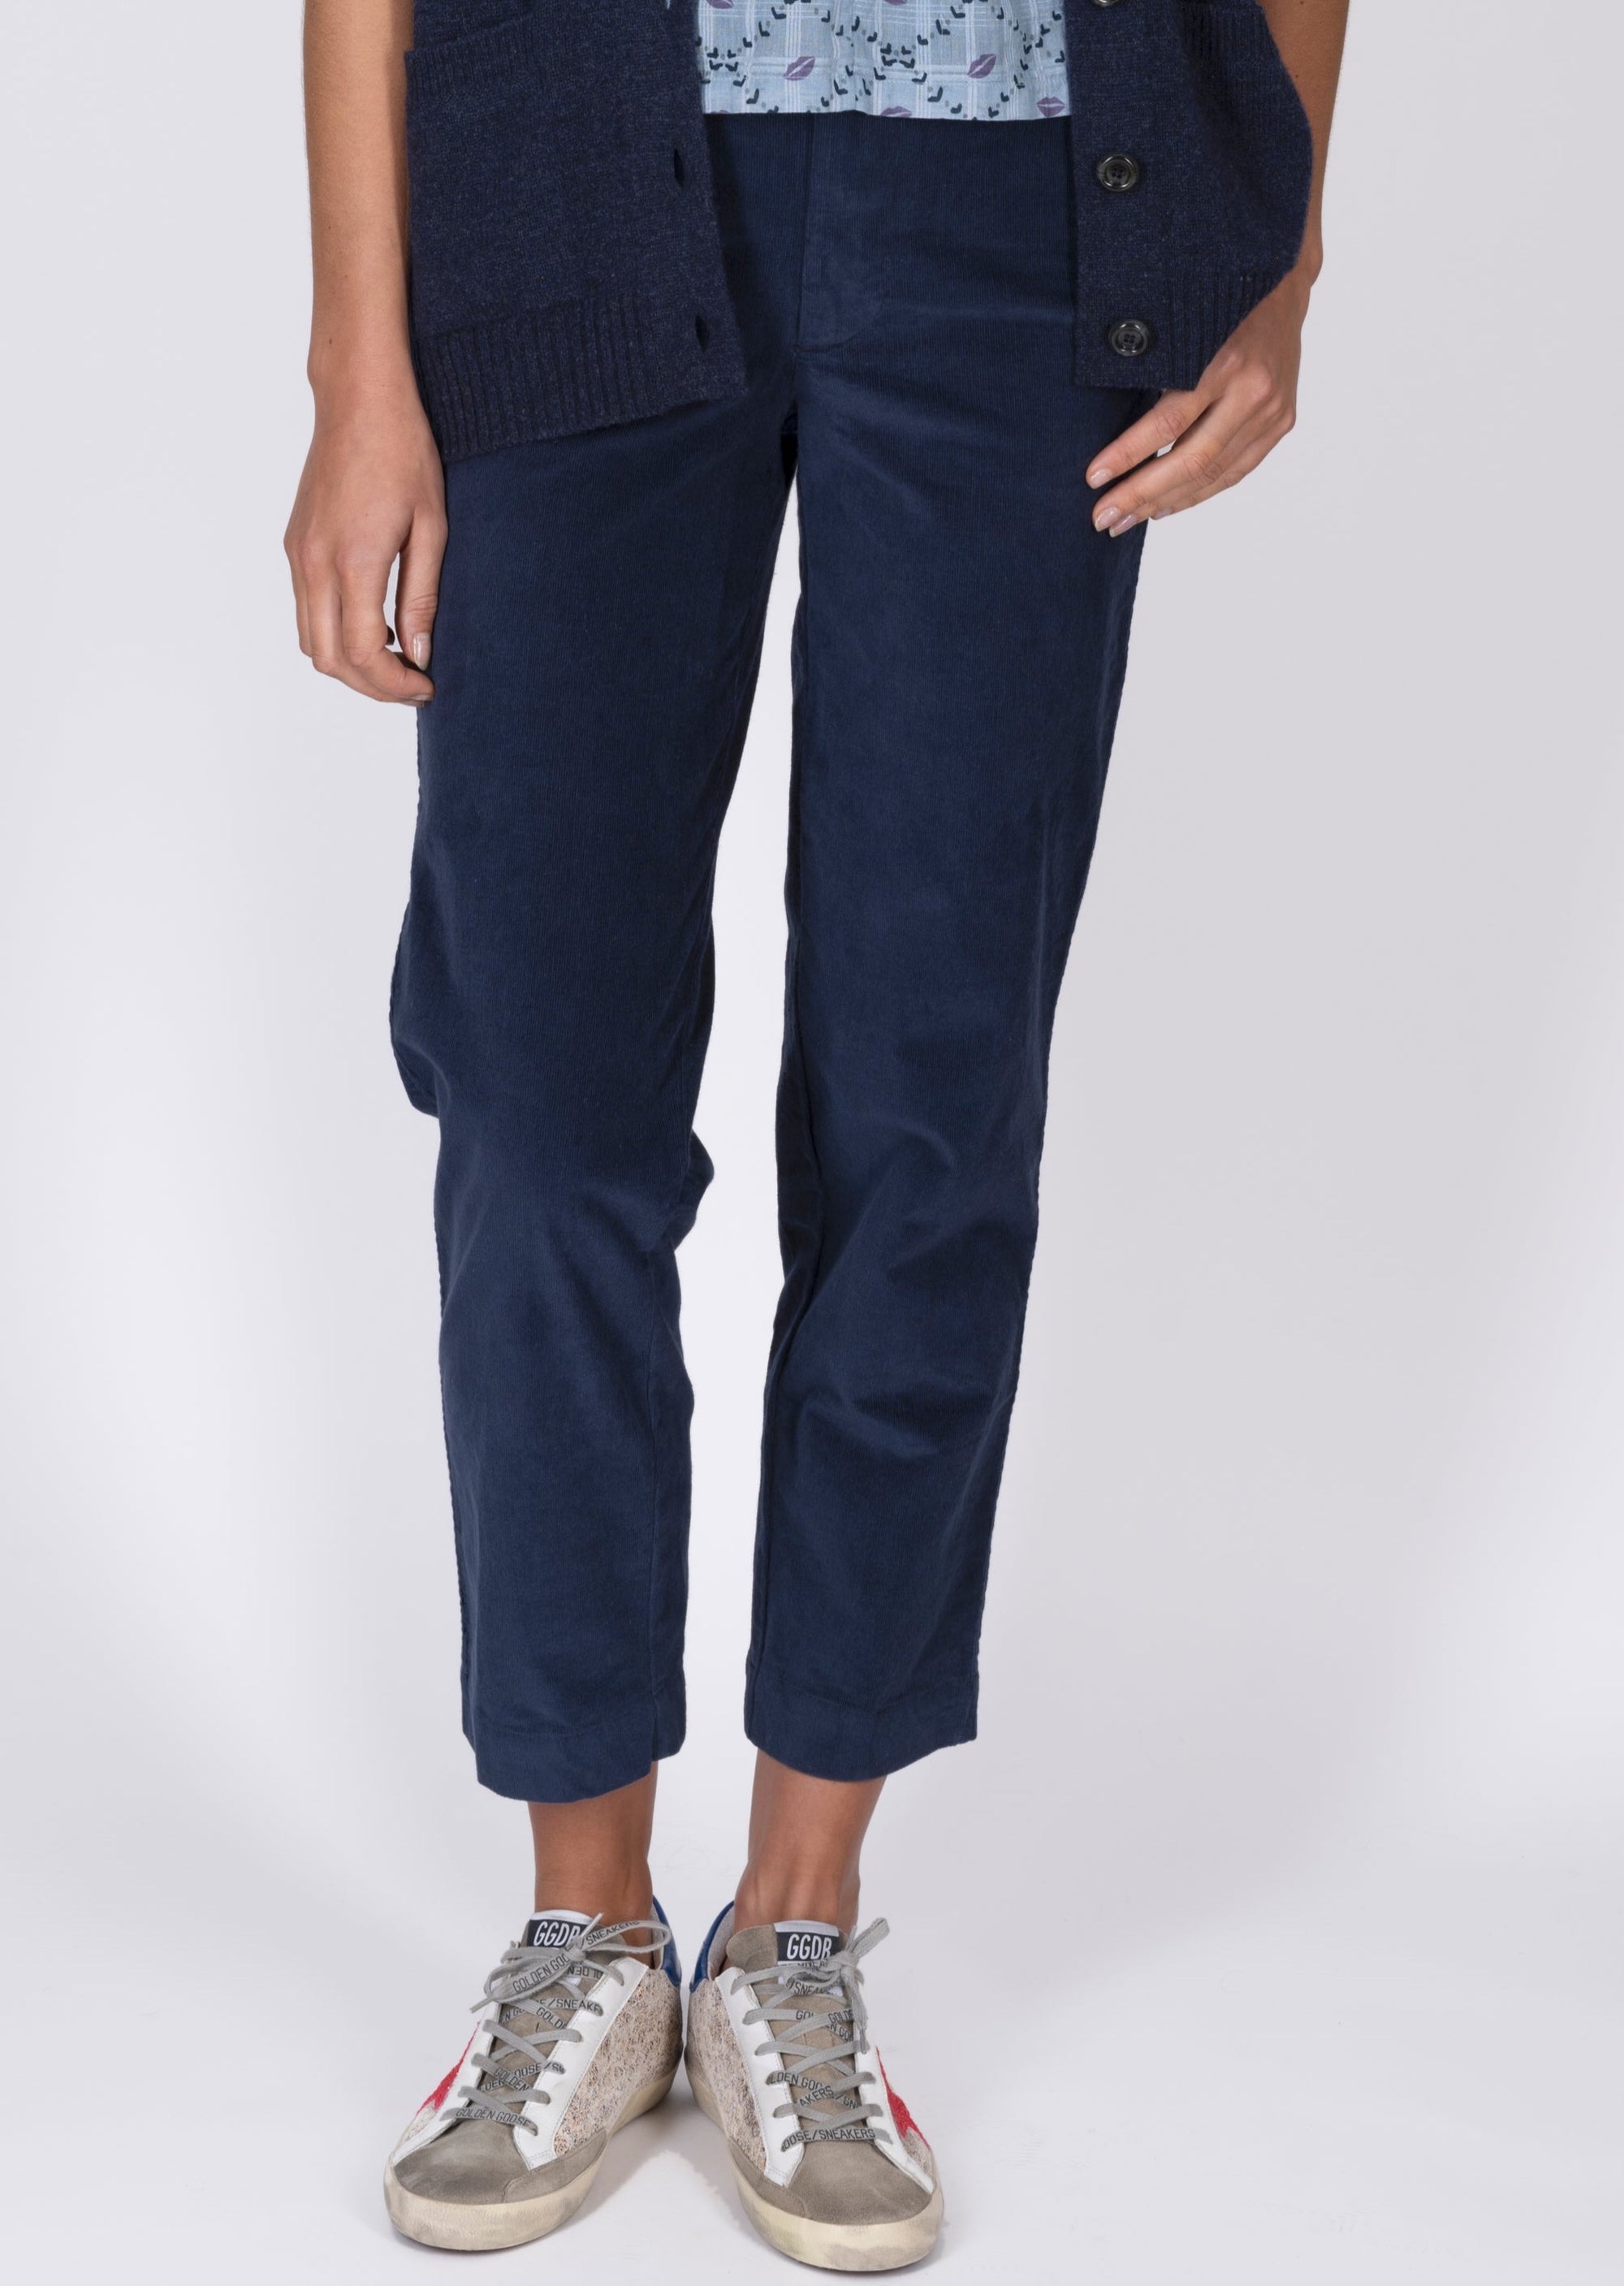 Chino-style stretch fine-cord navy-blue trouser